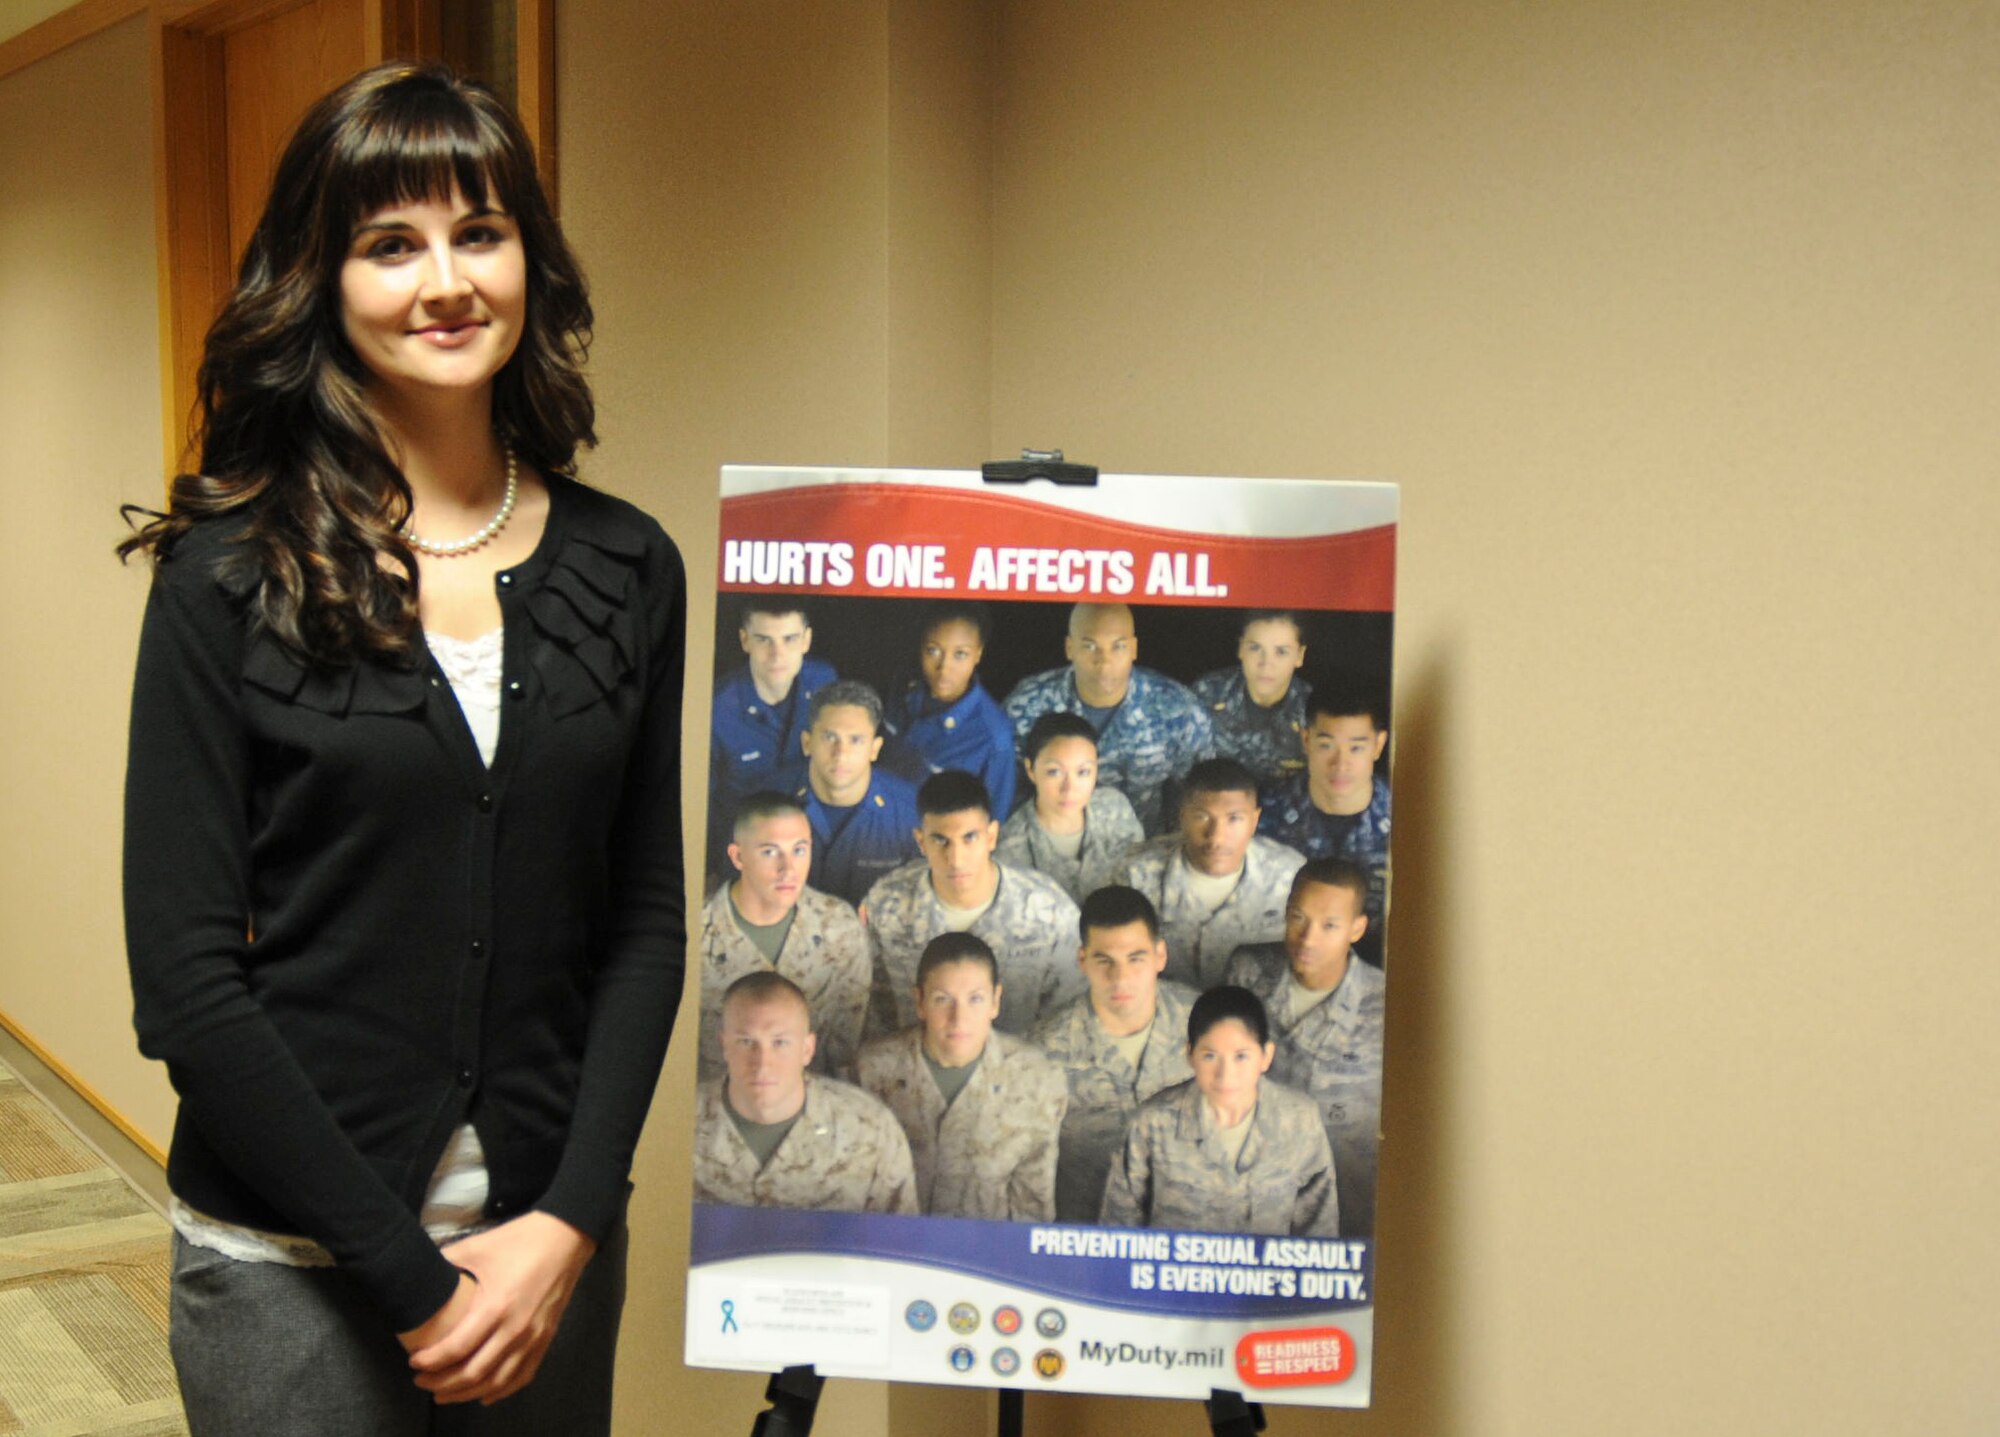 Ellsworth’s new Sexual Assault Responder coordinator, Kelly Dominguez, stands by a sexual assault prevention poster at the Rushmore Center on Ellsworth Air Force Base, S.D., April 23, 2012. In support of April being sexual assault awareness month, the SARC office has displayed posters and set up tables throughout the base informing Airmen about sexual assault awareness and prevention. (U.S. Air Force photo by Airman 1st Class Anania Tekurio/Released) 